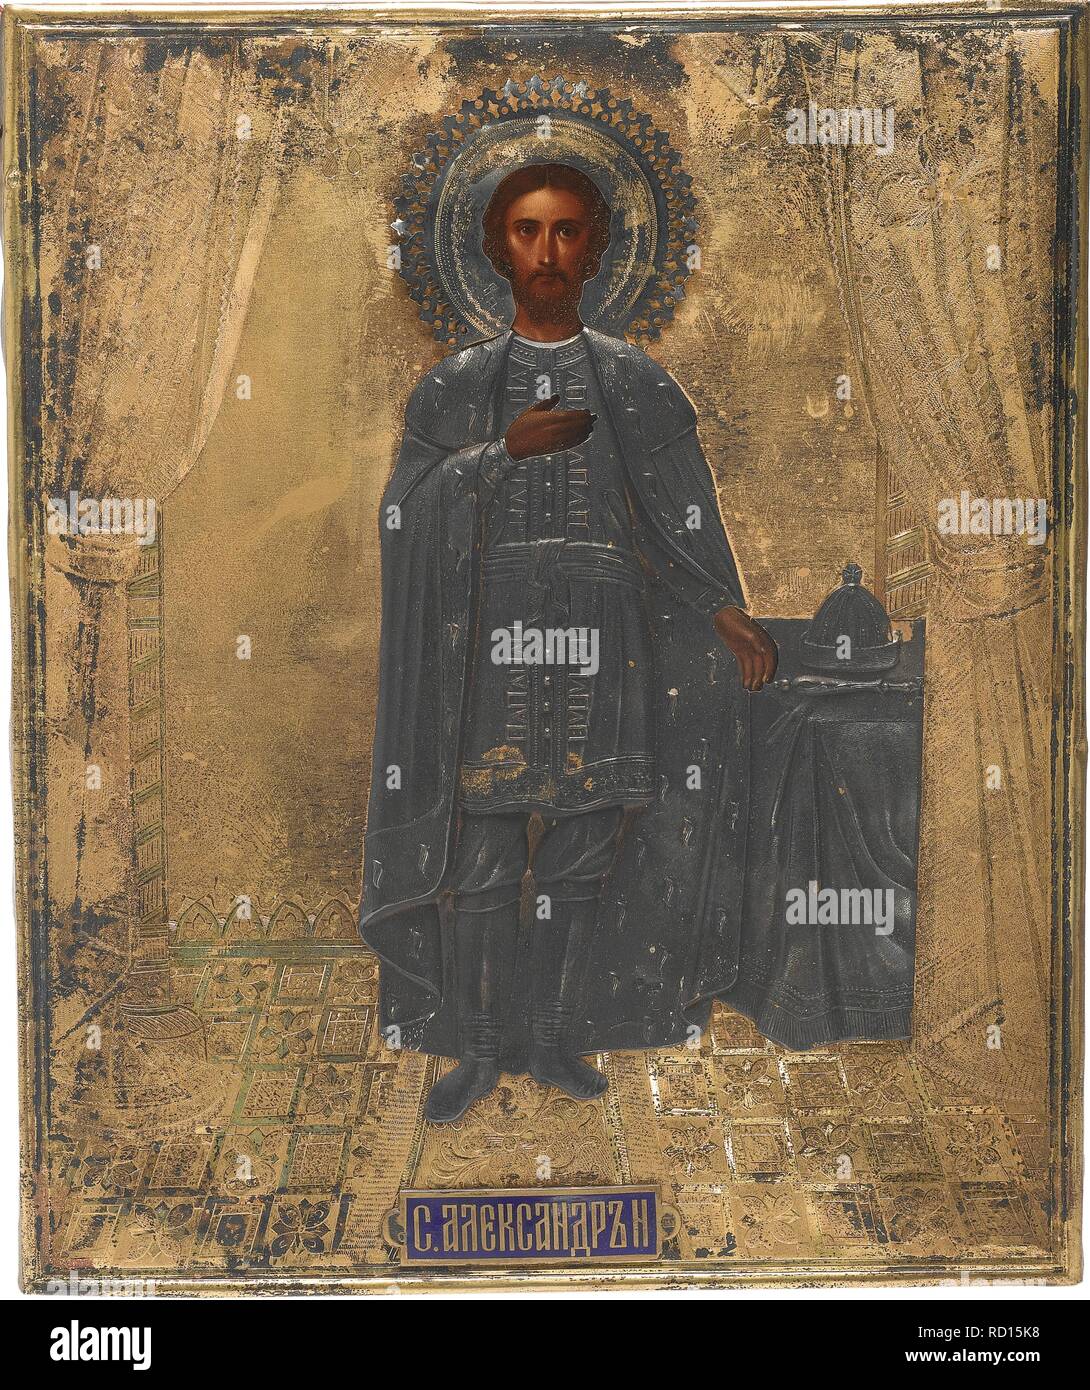 Saint Grand Prince Alexander Nevsky. Museum: PRIVATE COLLECTION. Author: Russian icon. Stock Photo